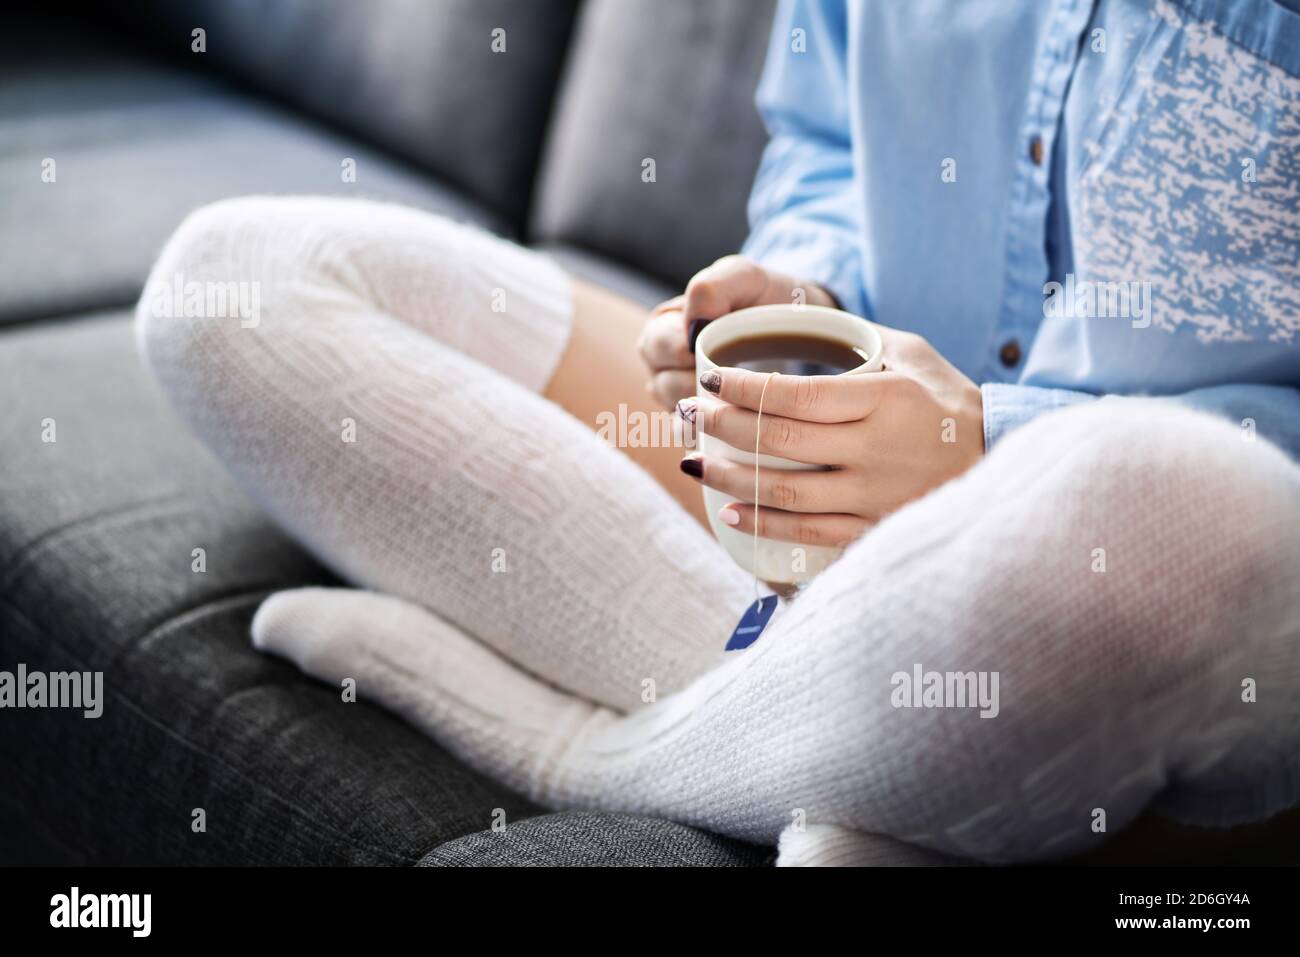 Long cozy warm socks and a hot cup of tea in winter. Woman enjoying relaxed lifestyle on home couch. Sick person with flu or fever sitting on sofa. Stock Photo